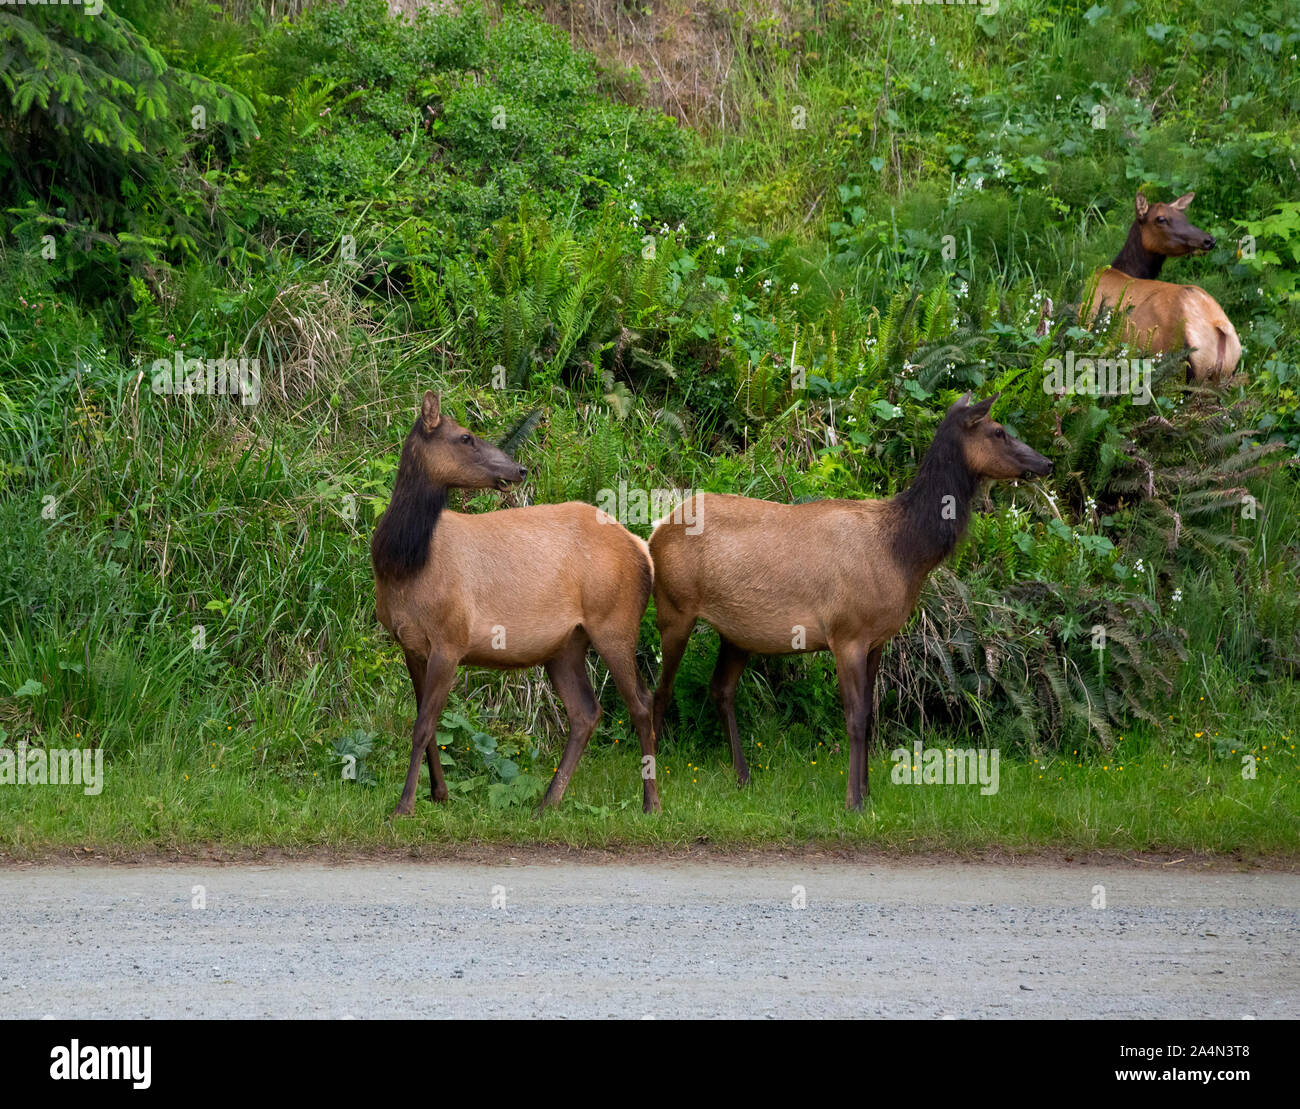 CA0365600...CALIFORNIA - Roosevelt elk foraging along the edge of the Gold Bluffs Road on the coast section of Prairie Creek Redwoods State Park. Stock Photo